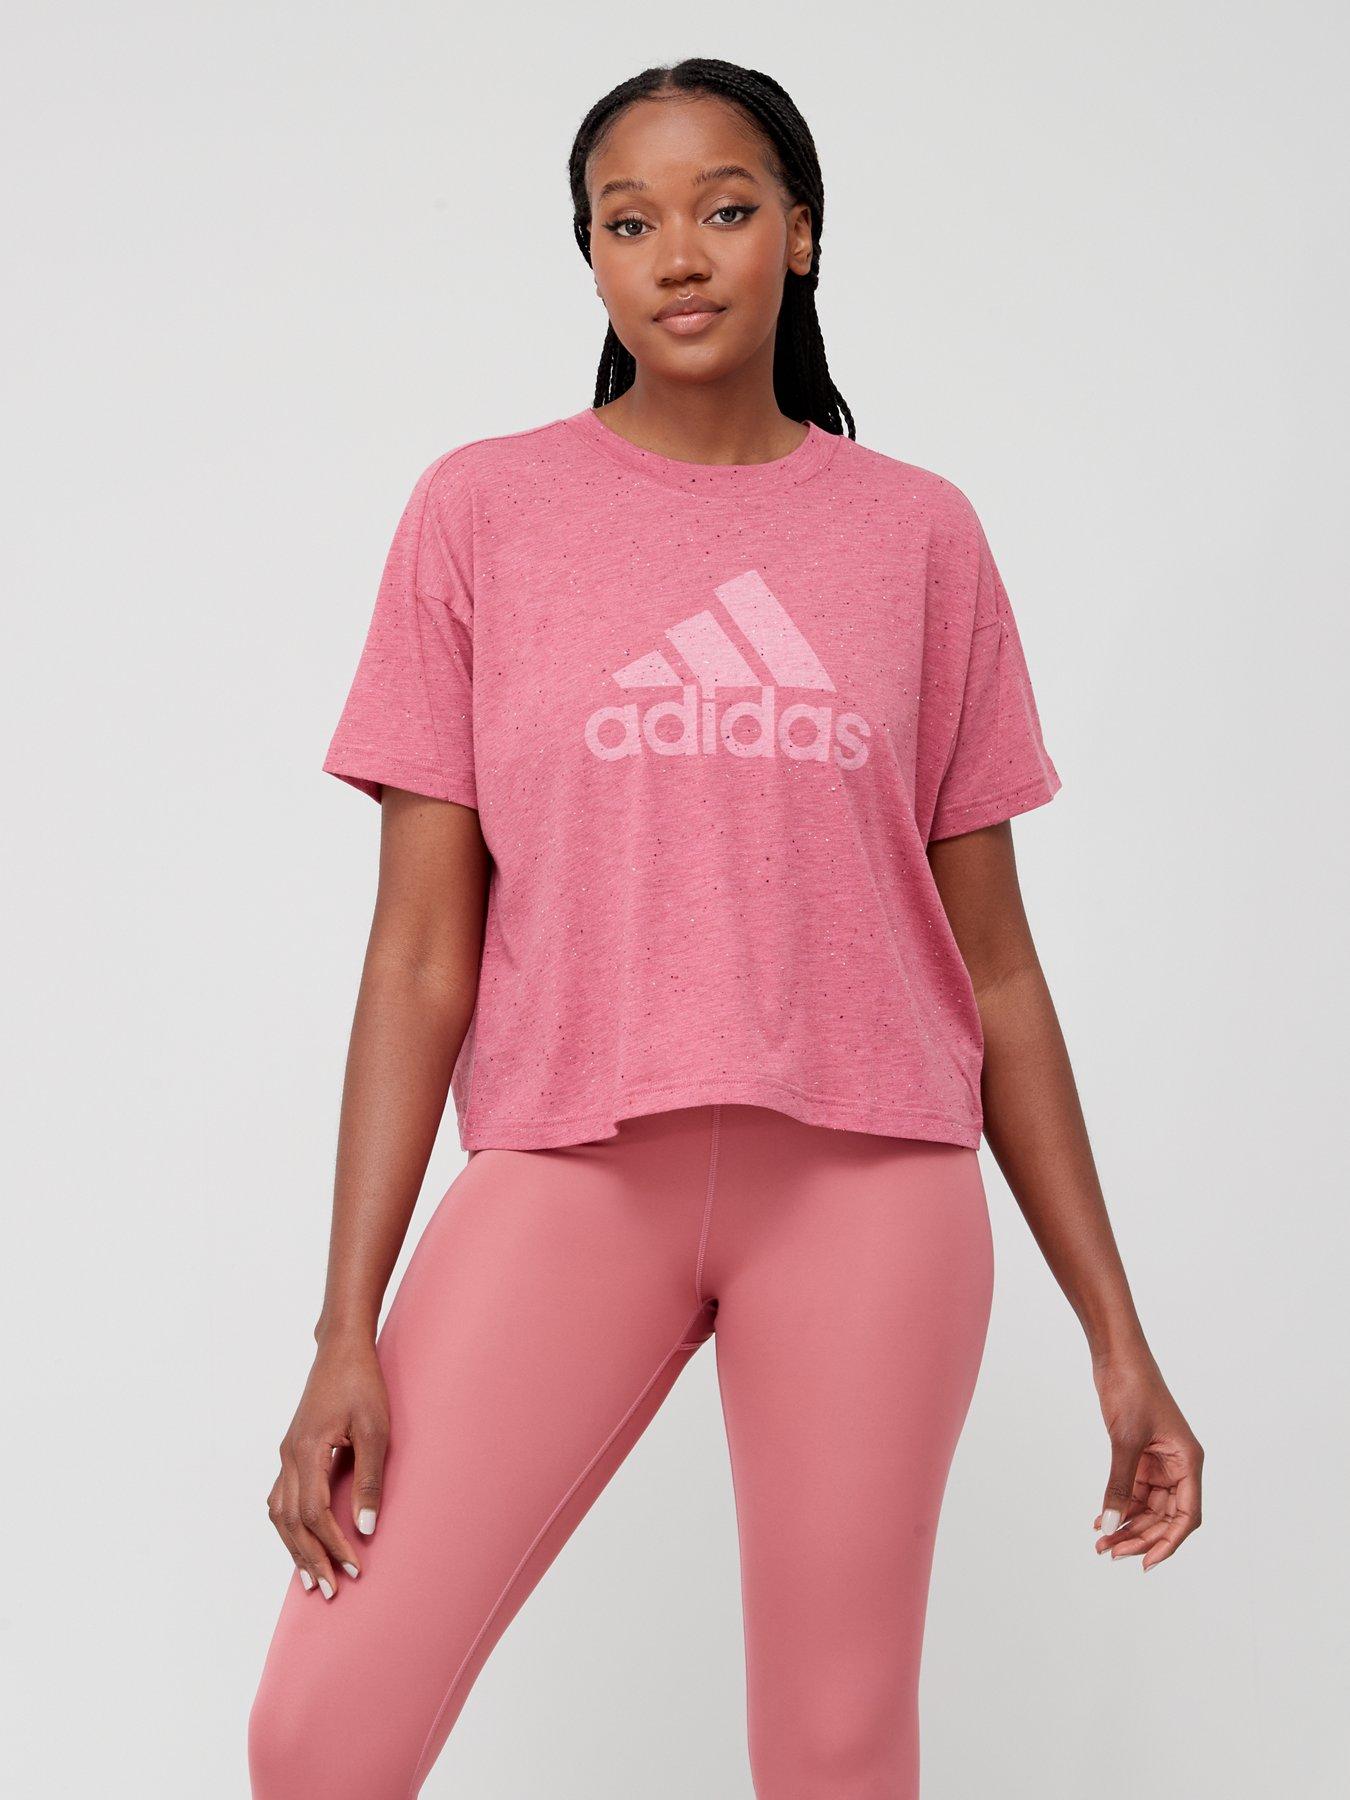 Vueltas y vueltas Disminución Cuerpo Pink | Adidas | T-shirts | Womens sports clothing | Sports & leisure |  www.very.co.uk